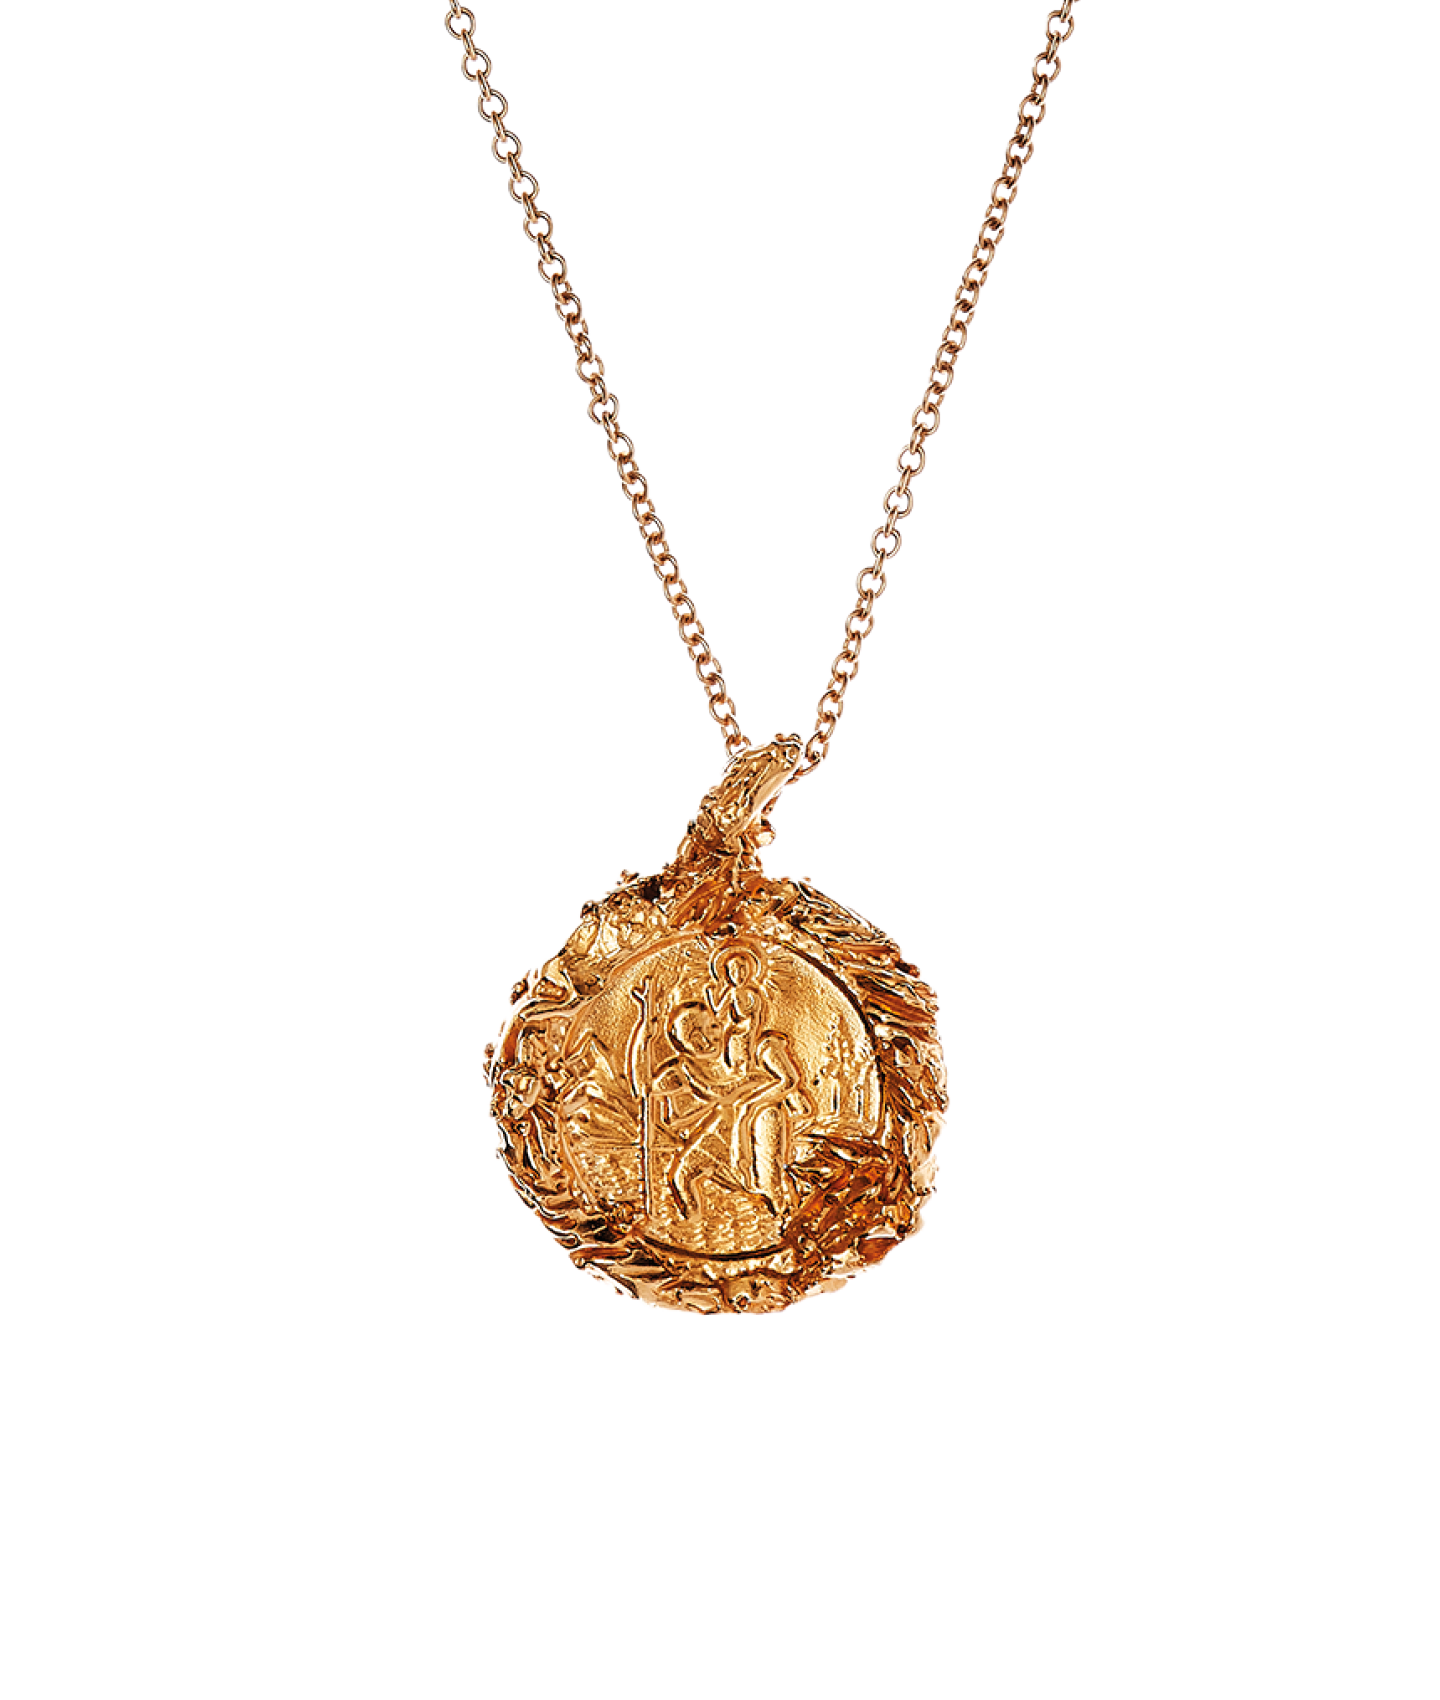 Joyfulle St. Michael Coin Pendant Necklace, Gifts for Men and Women,  Religious Jewelry with Prayer Greeting Card - Walmart.com